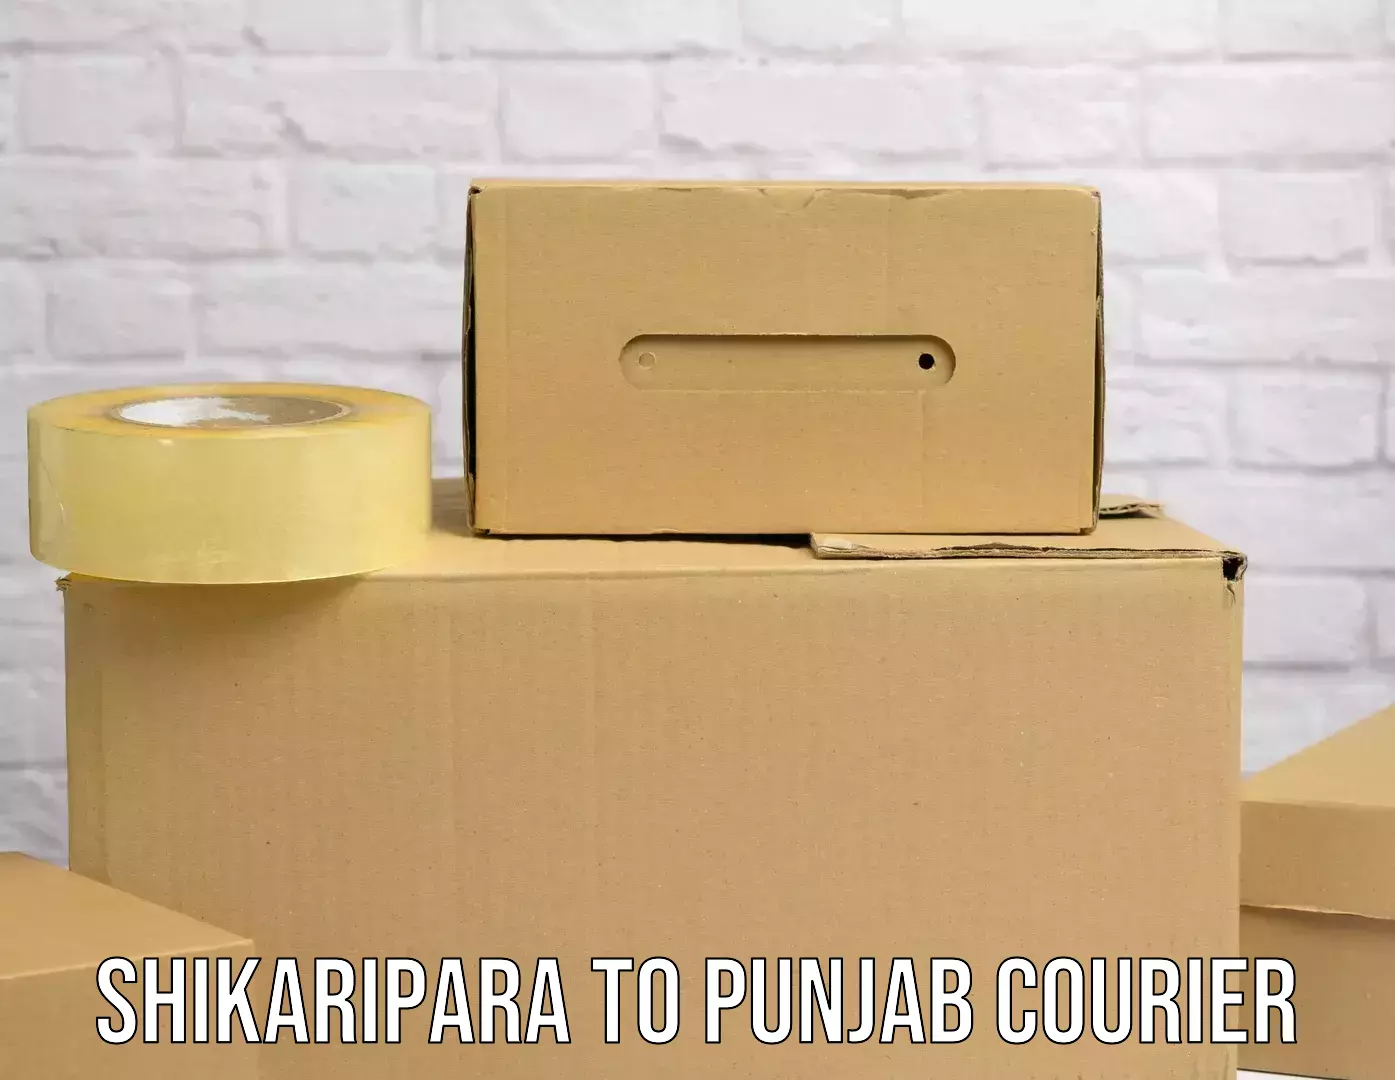 Advanced package delivery Shikaripara to Sangrur